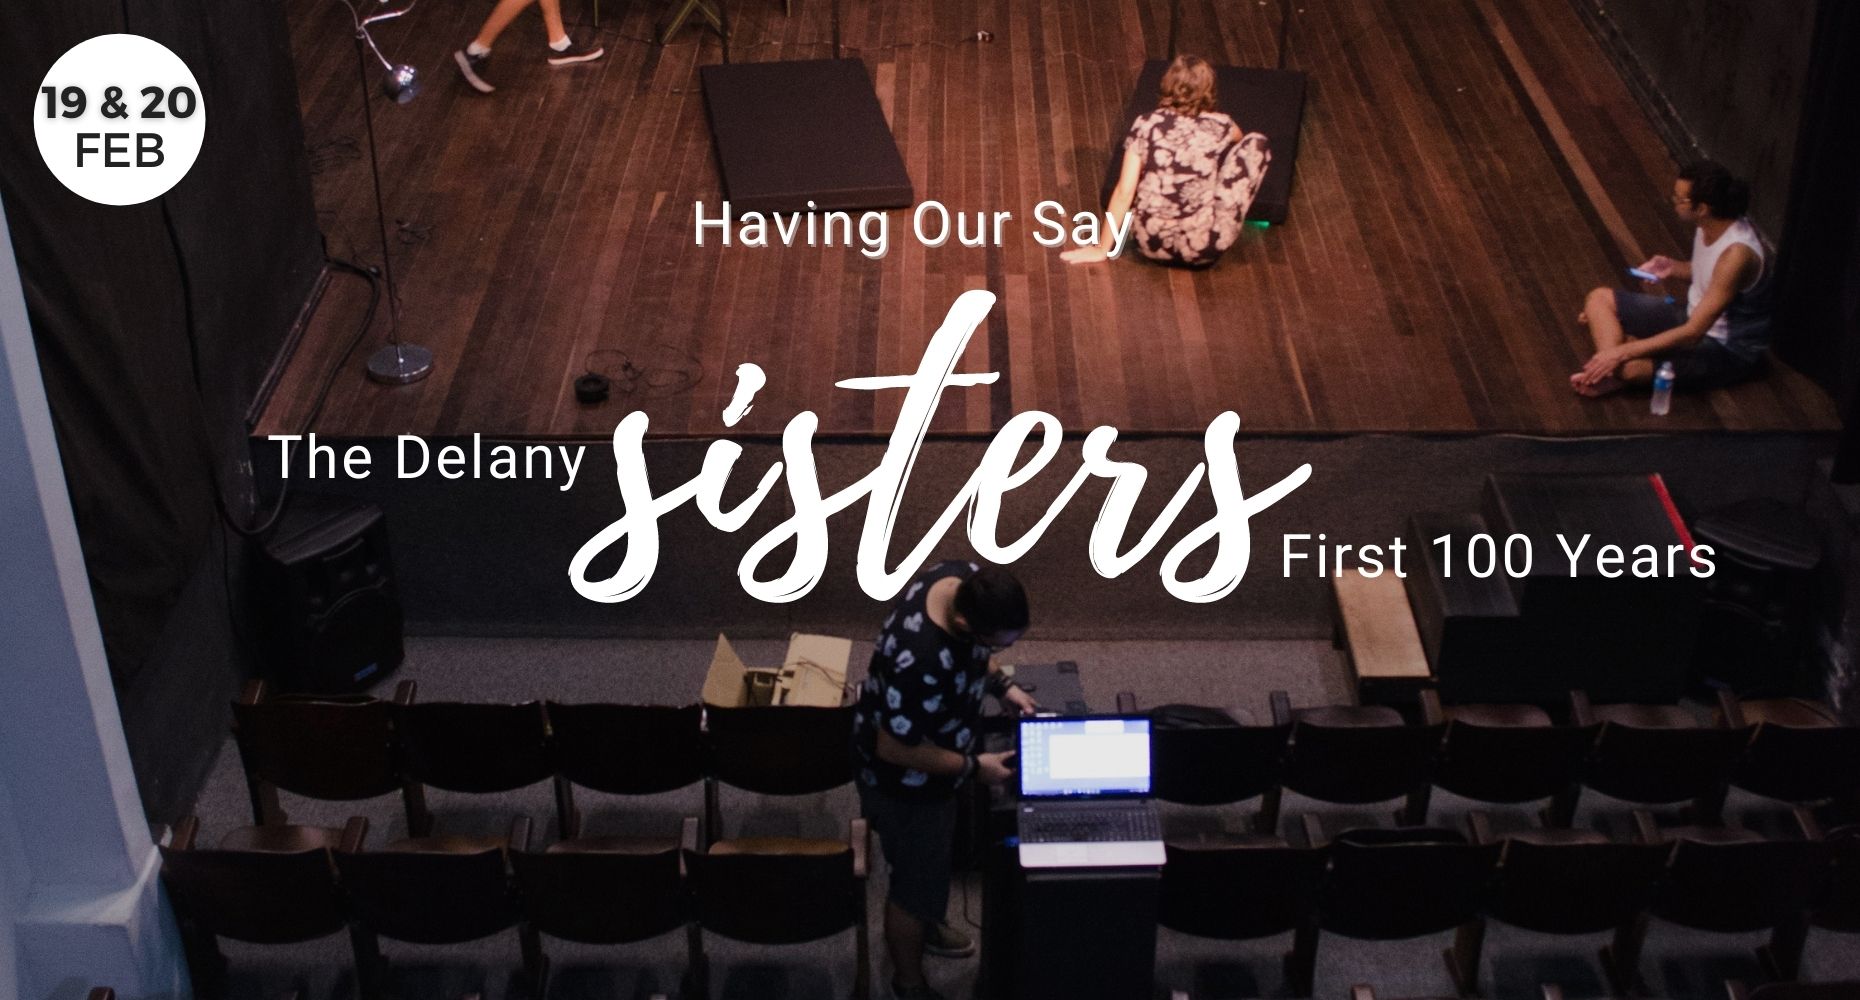 Having our Say the Delany Sisters, Whidbey playhouse, Whidbey Island, Oak Harbor, Washington, Events